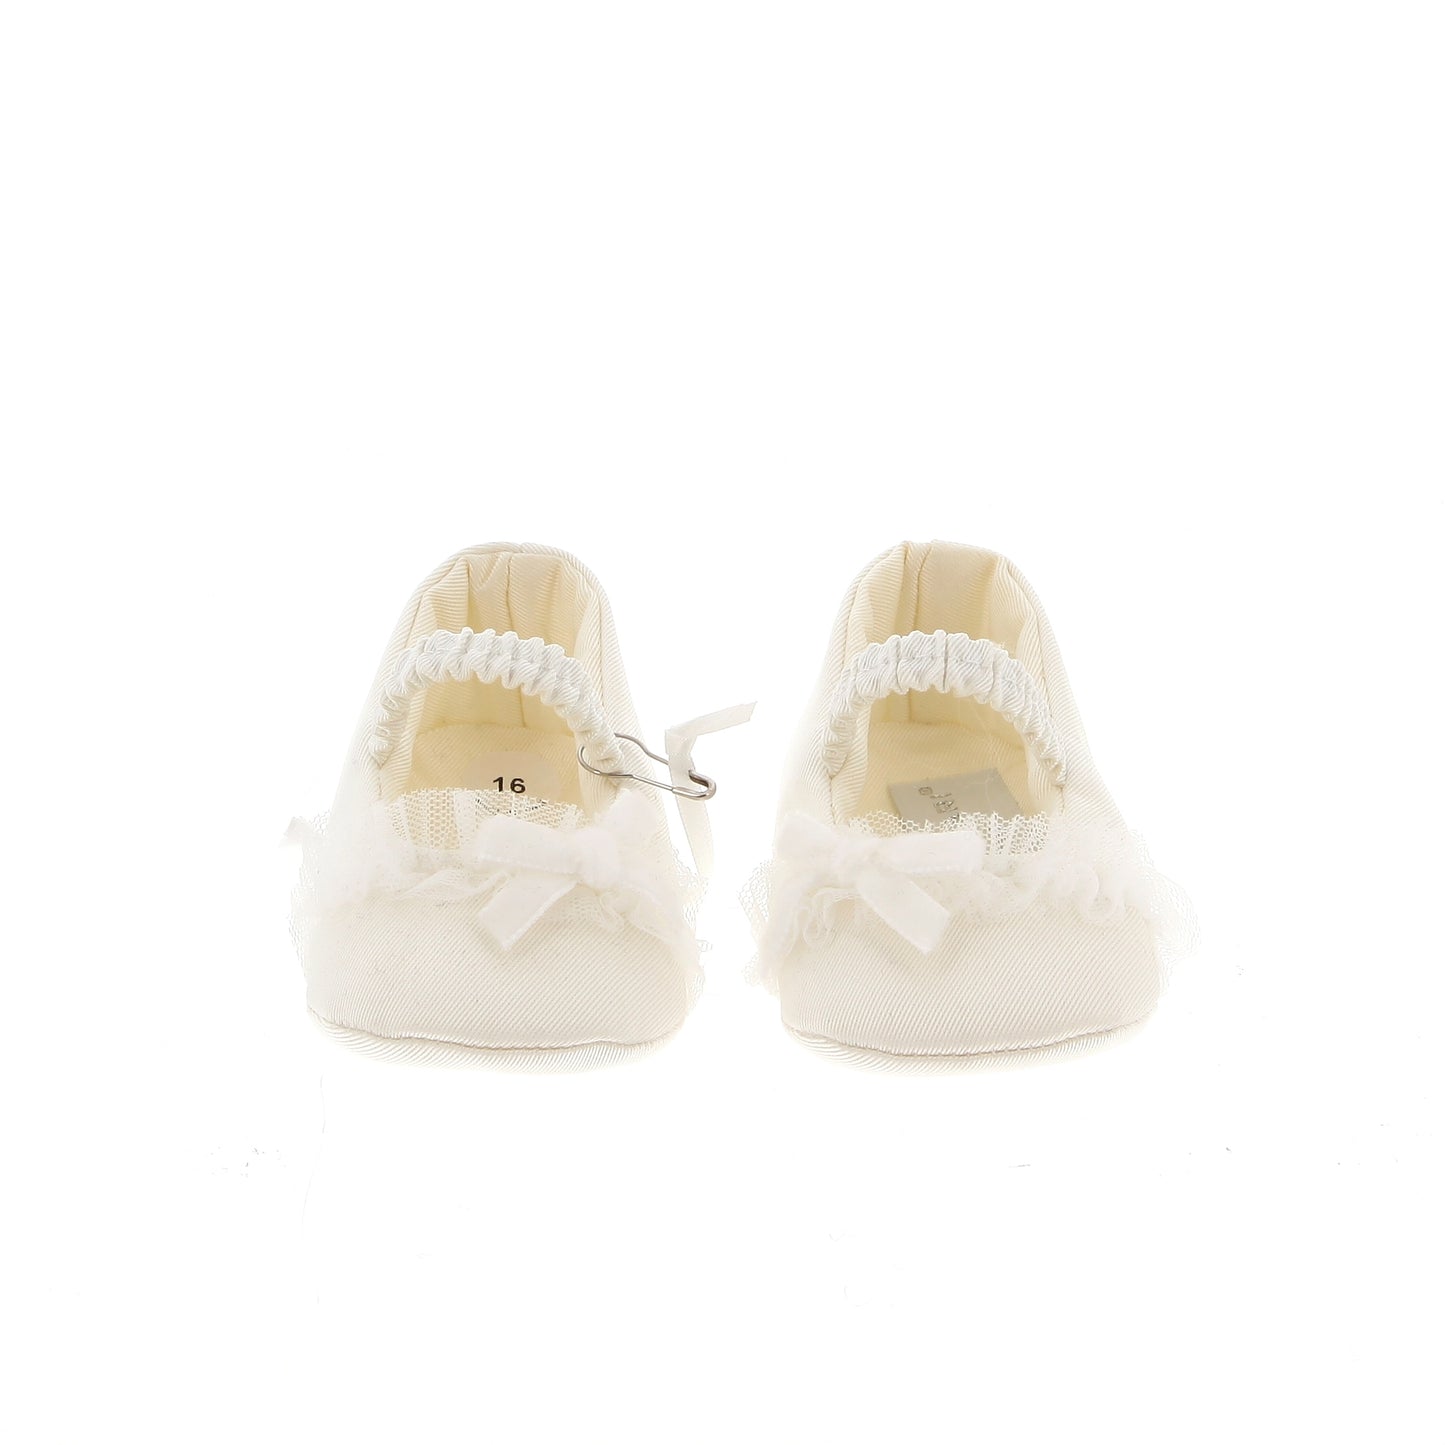 COLORICHIARI Baby shoe with tulle and cream bow A/W